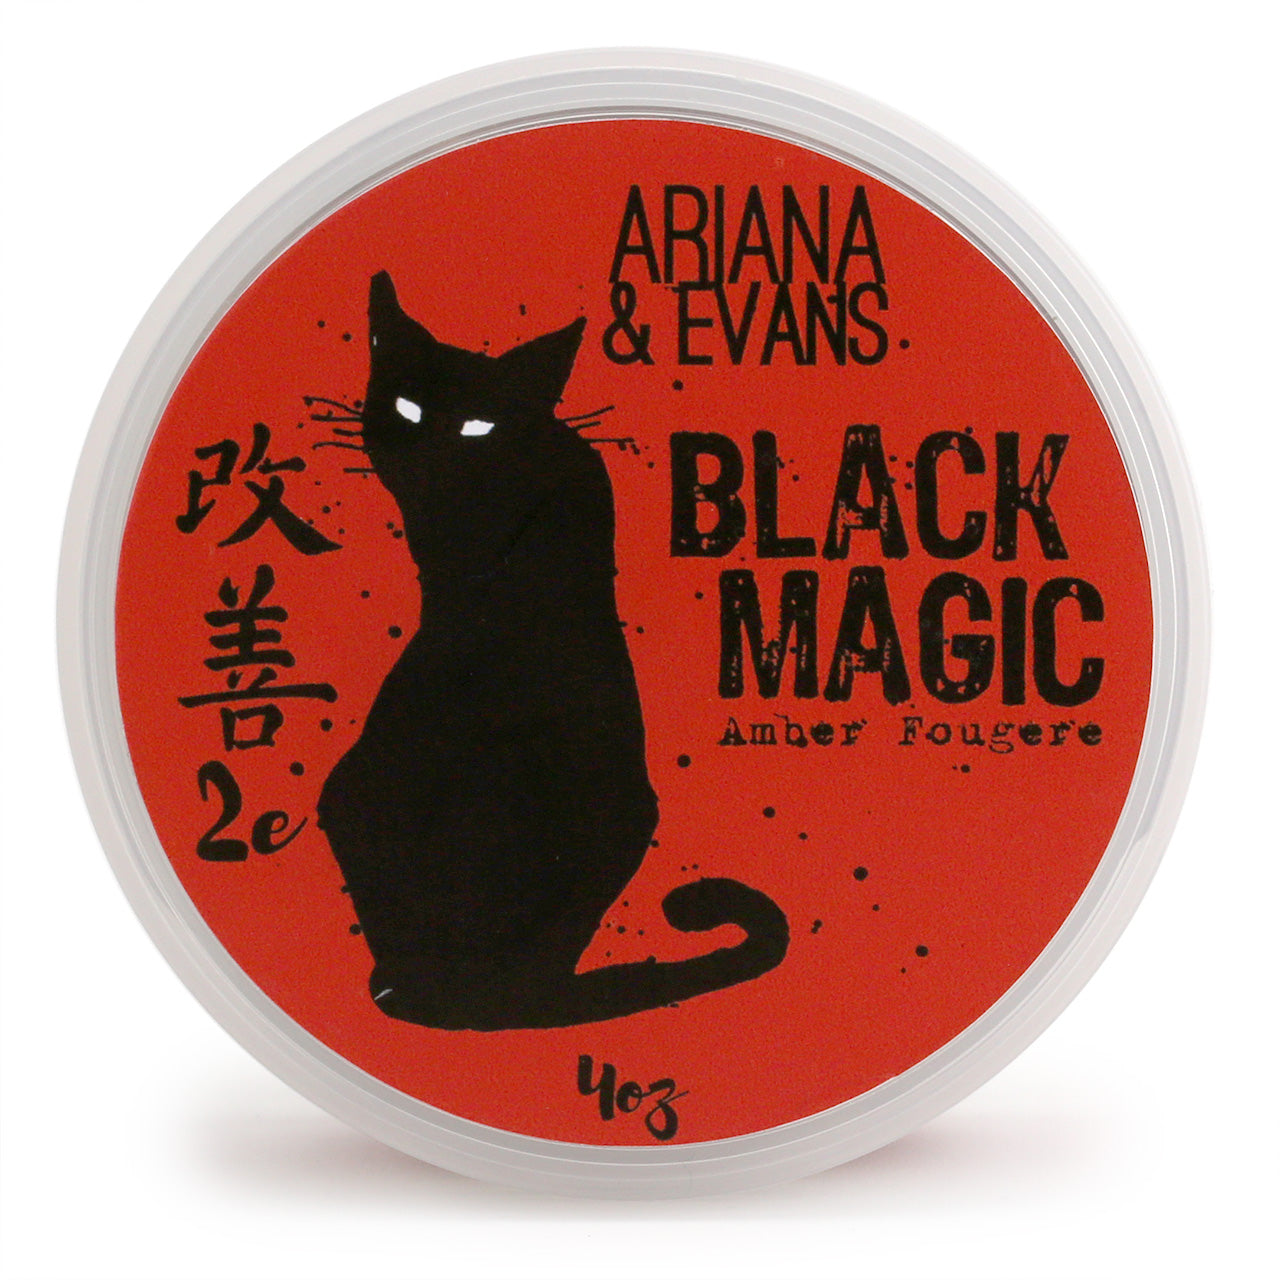 Ariana & Evans Black Magic Shaving Soap view of top label which is red with a black cat looking backward over his shoulder with clear white eyes